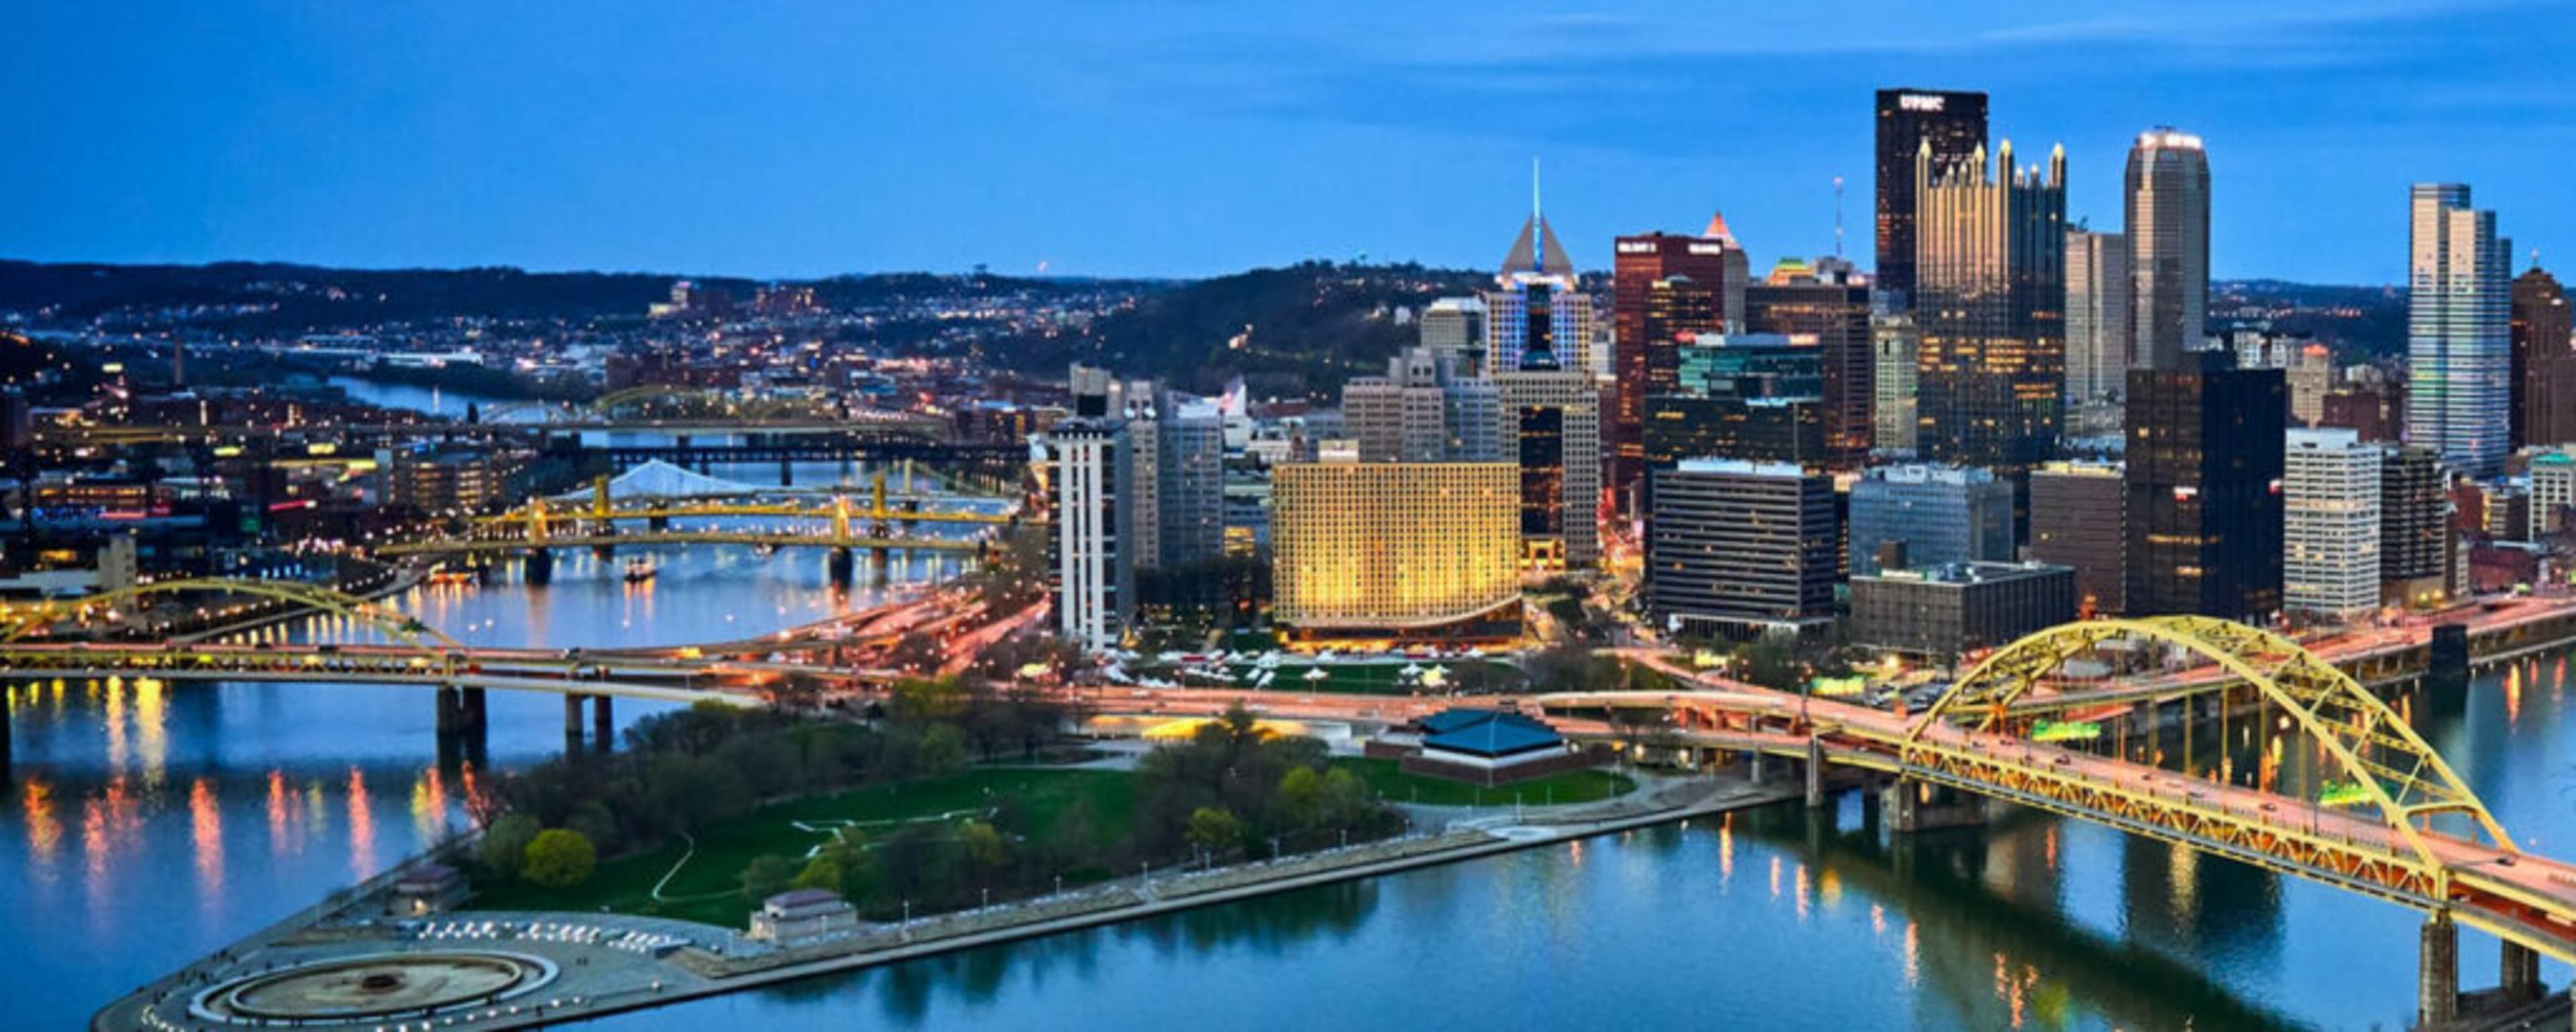 Pittsburgh skyline showing iconic bridges and river, backdrop for PyCon event